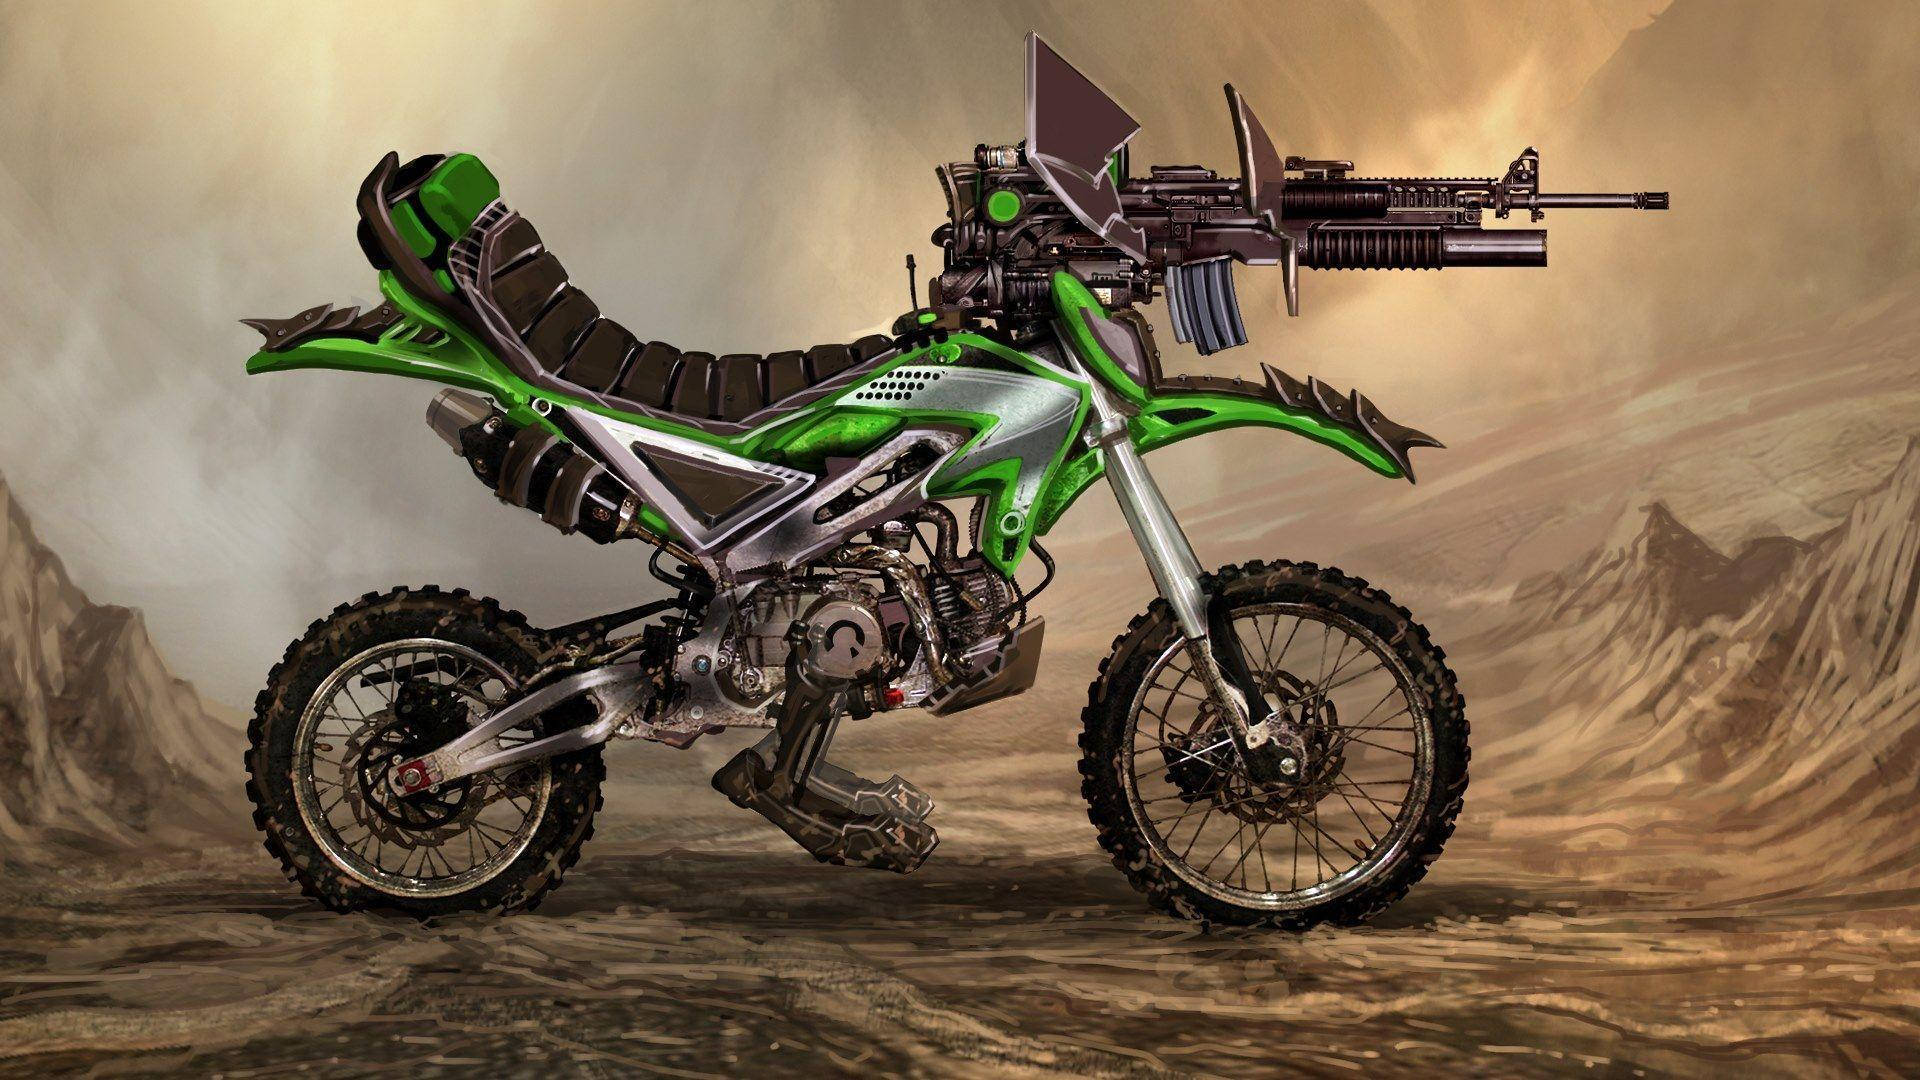 A Green Motorcycle With A Gun On It Wallpaper